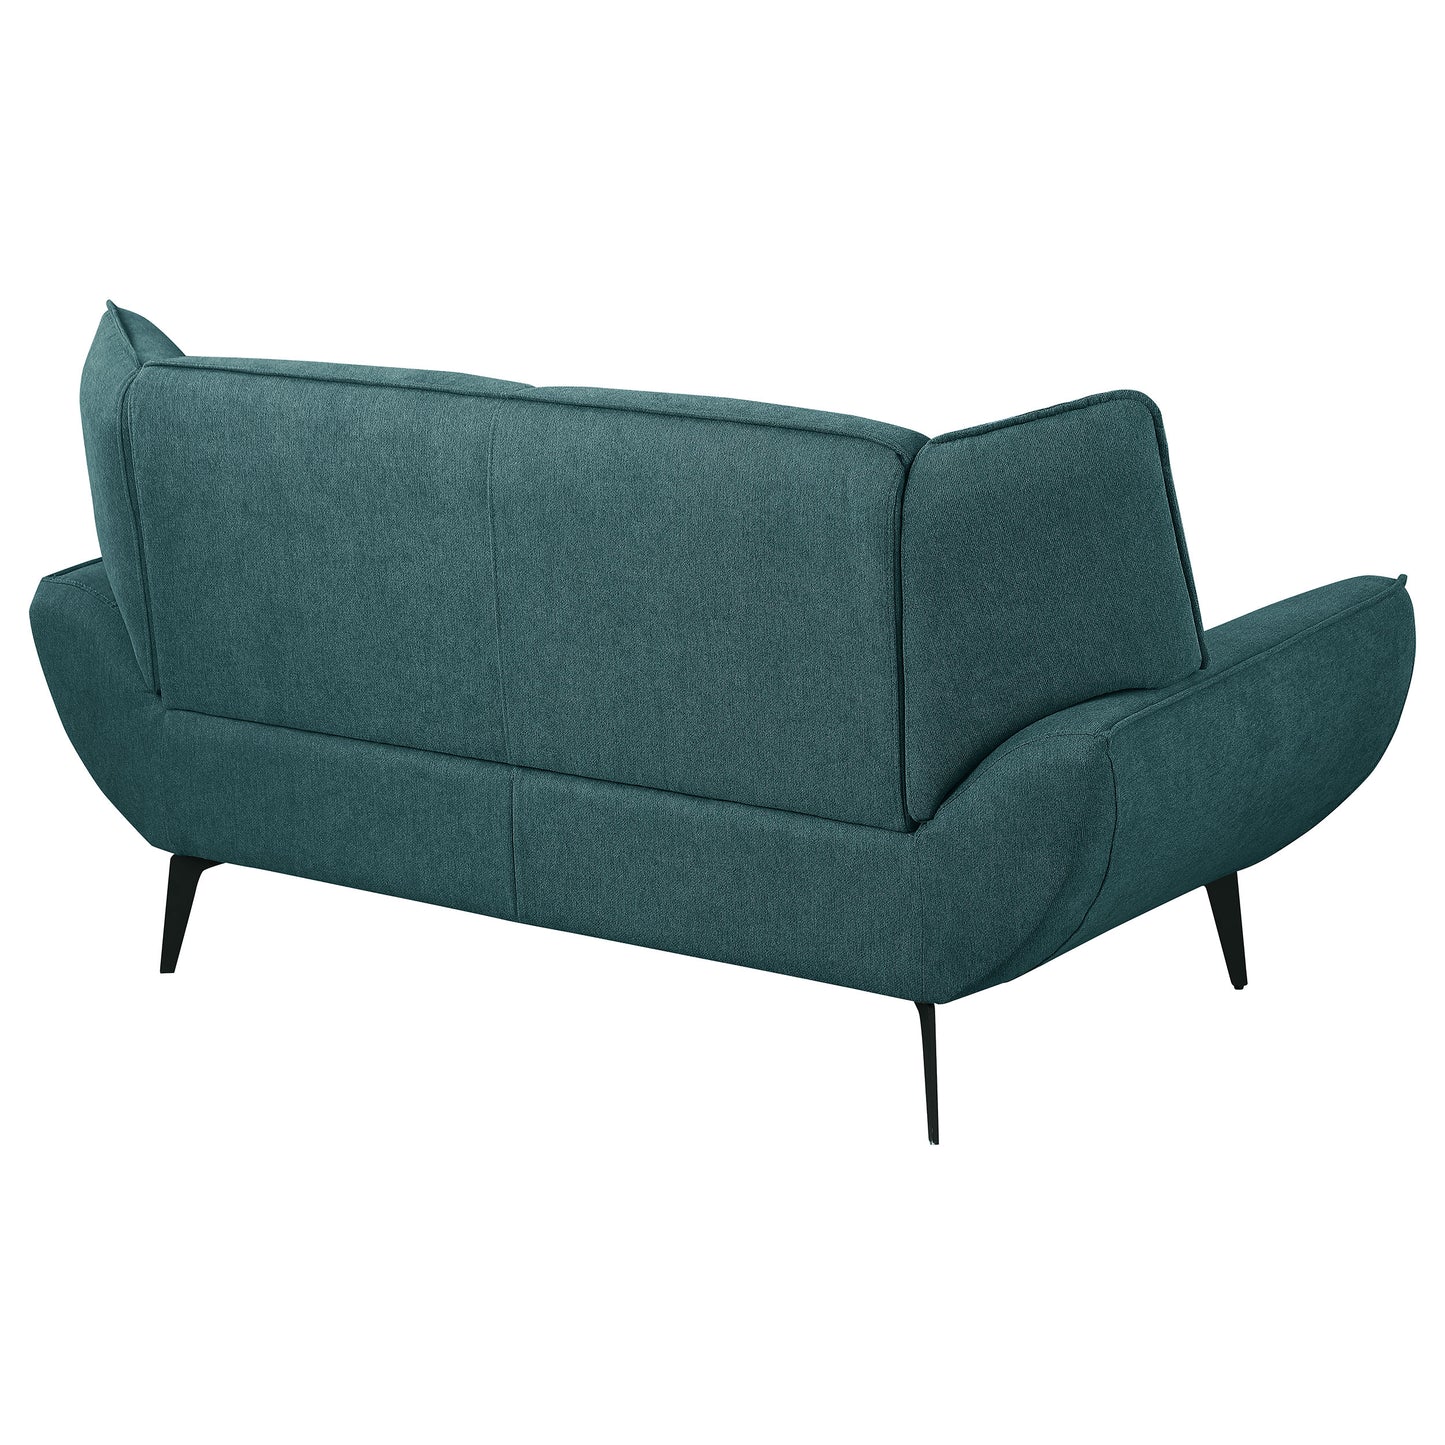 Acton Upholstered Flared Arm Loveseat Teal Blue